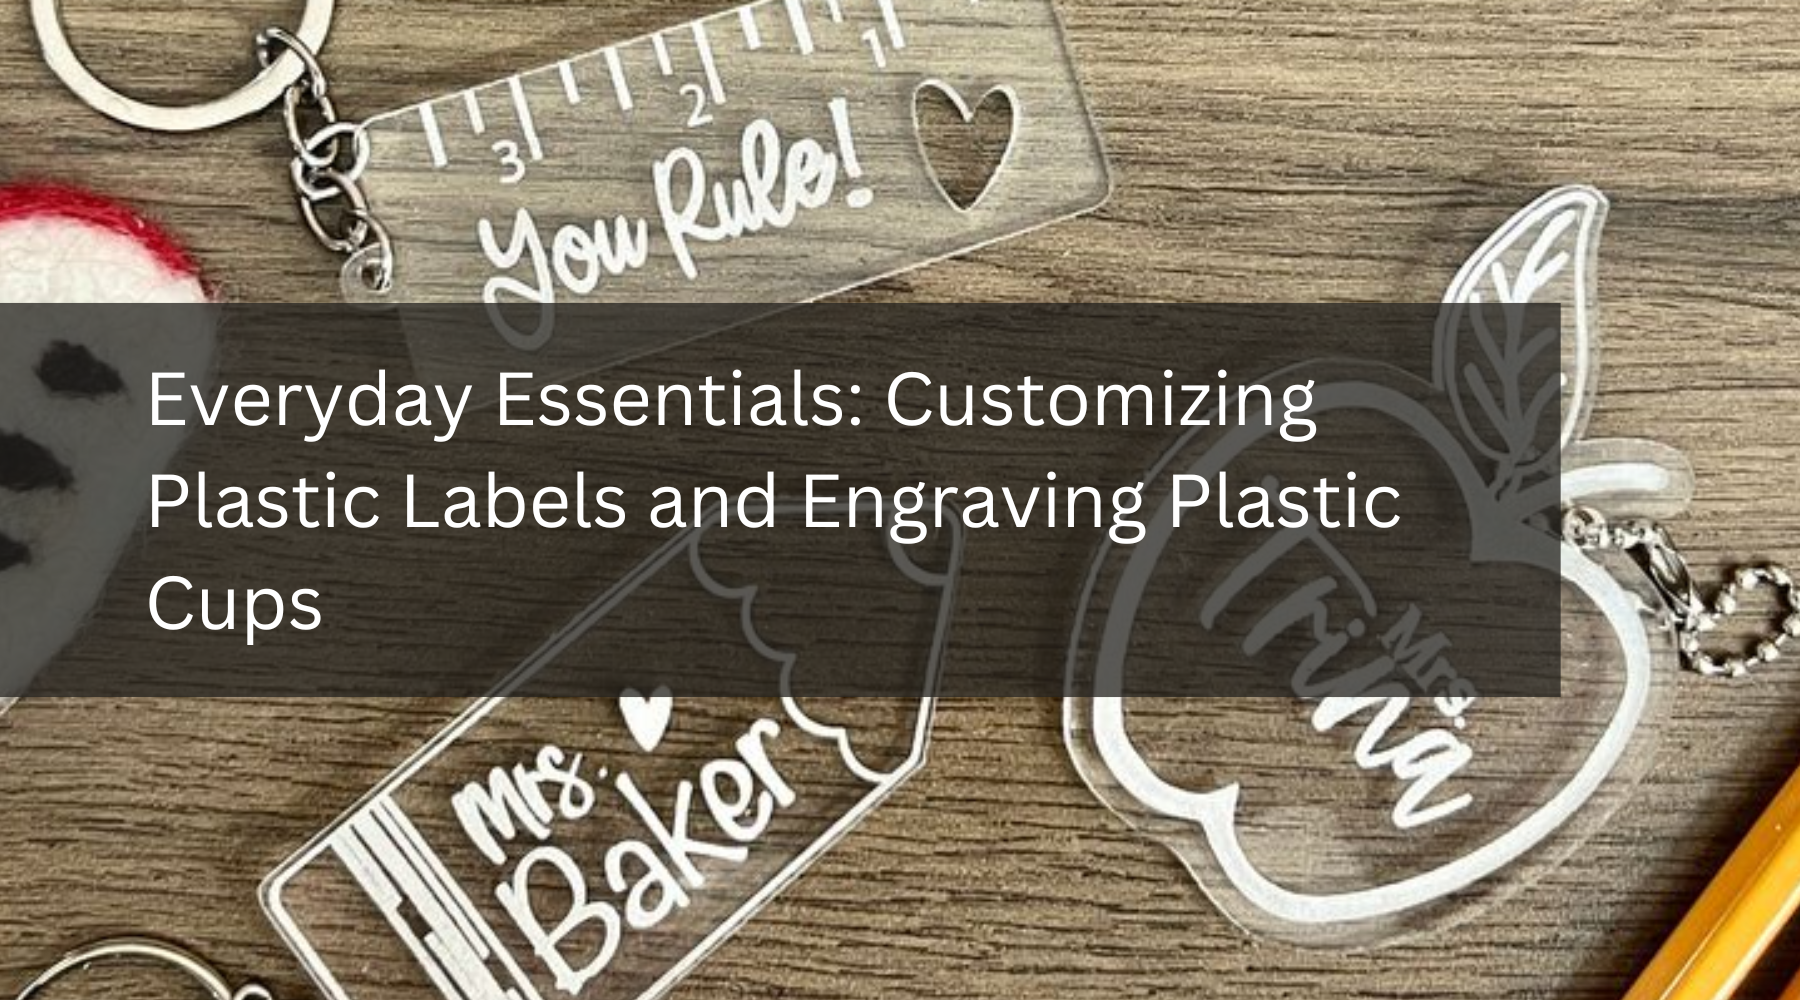 Everyday Essentials: Customizing Plastic Labels and Engraving Plastic Cups